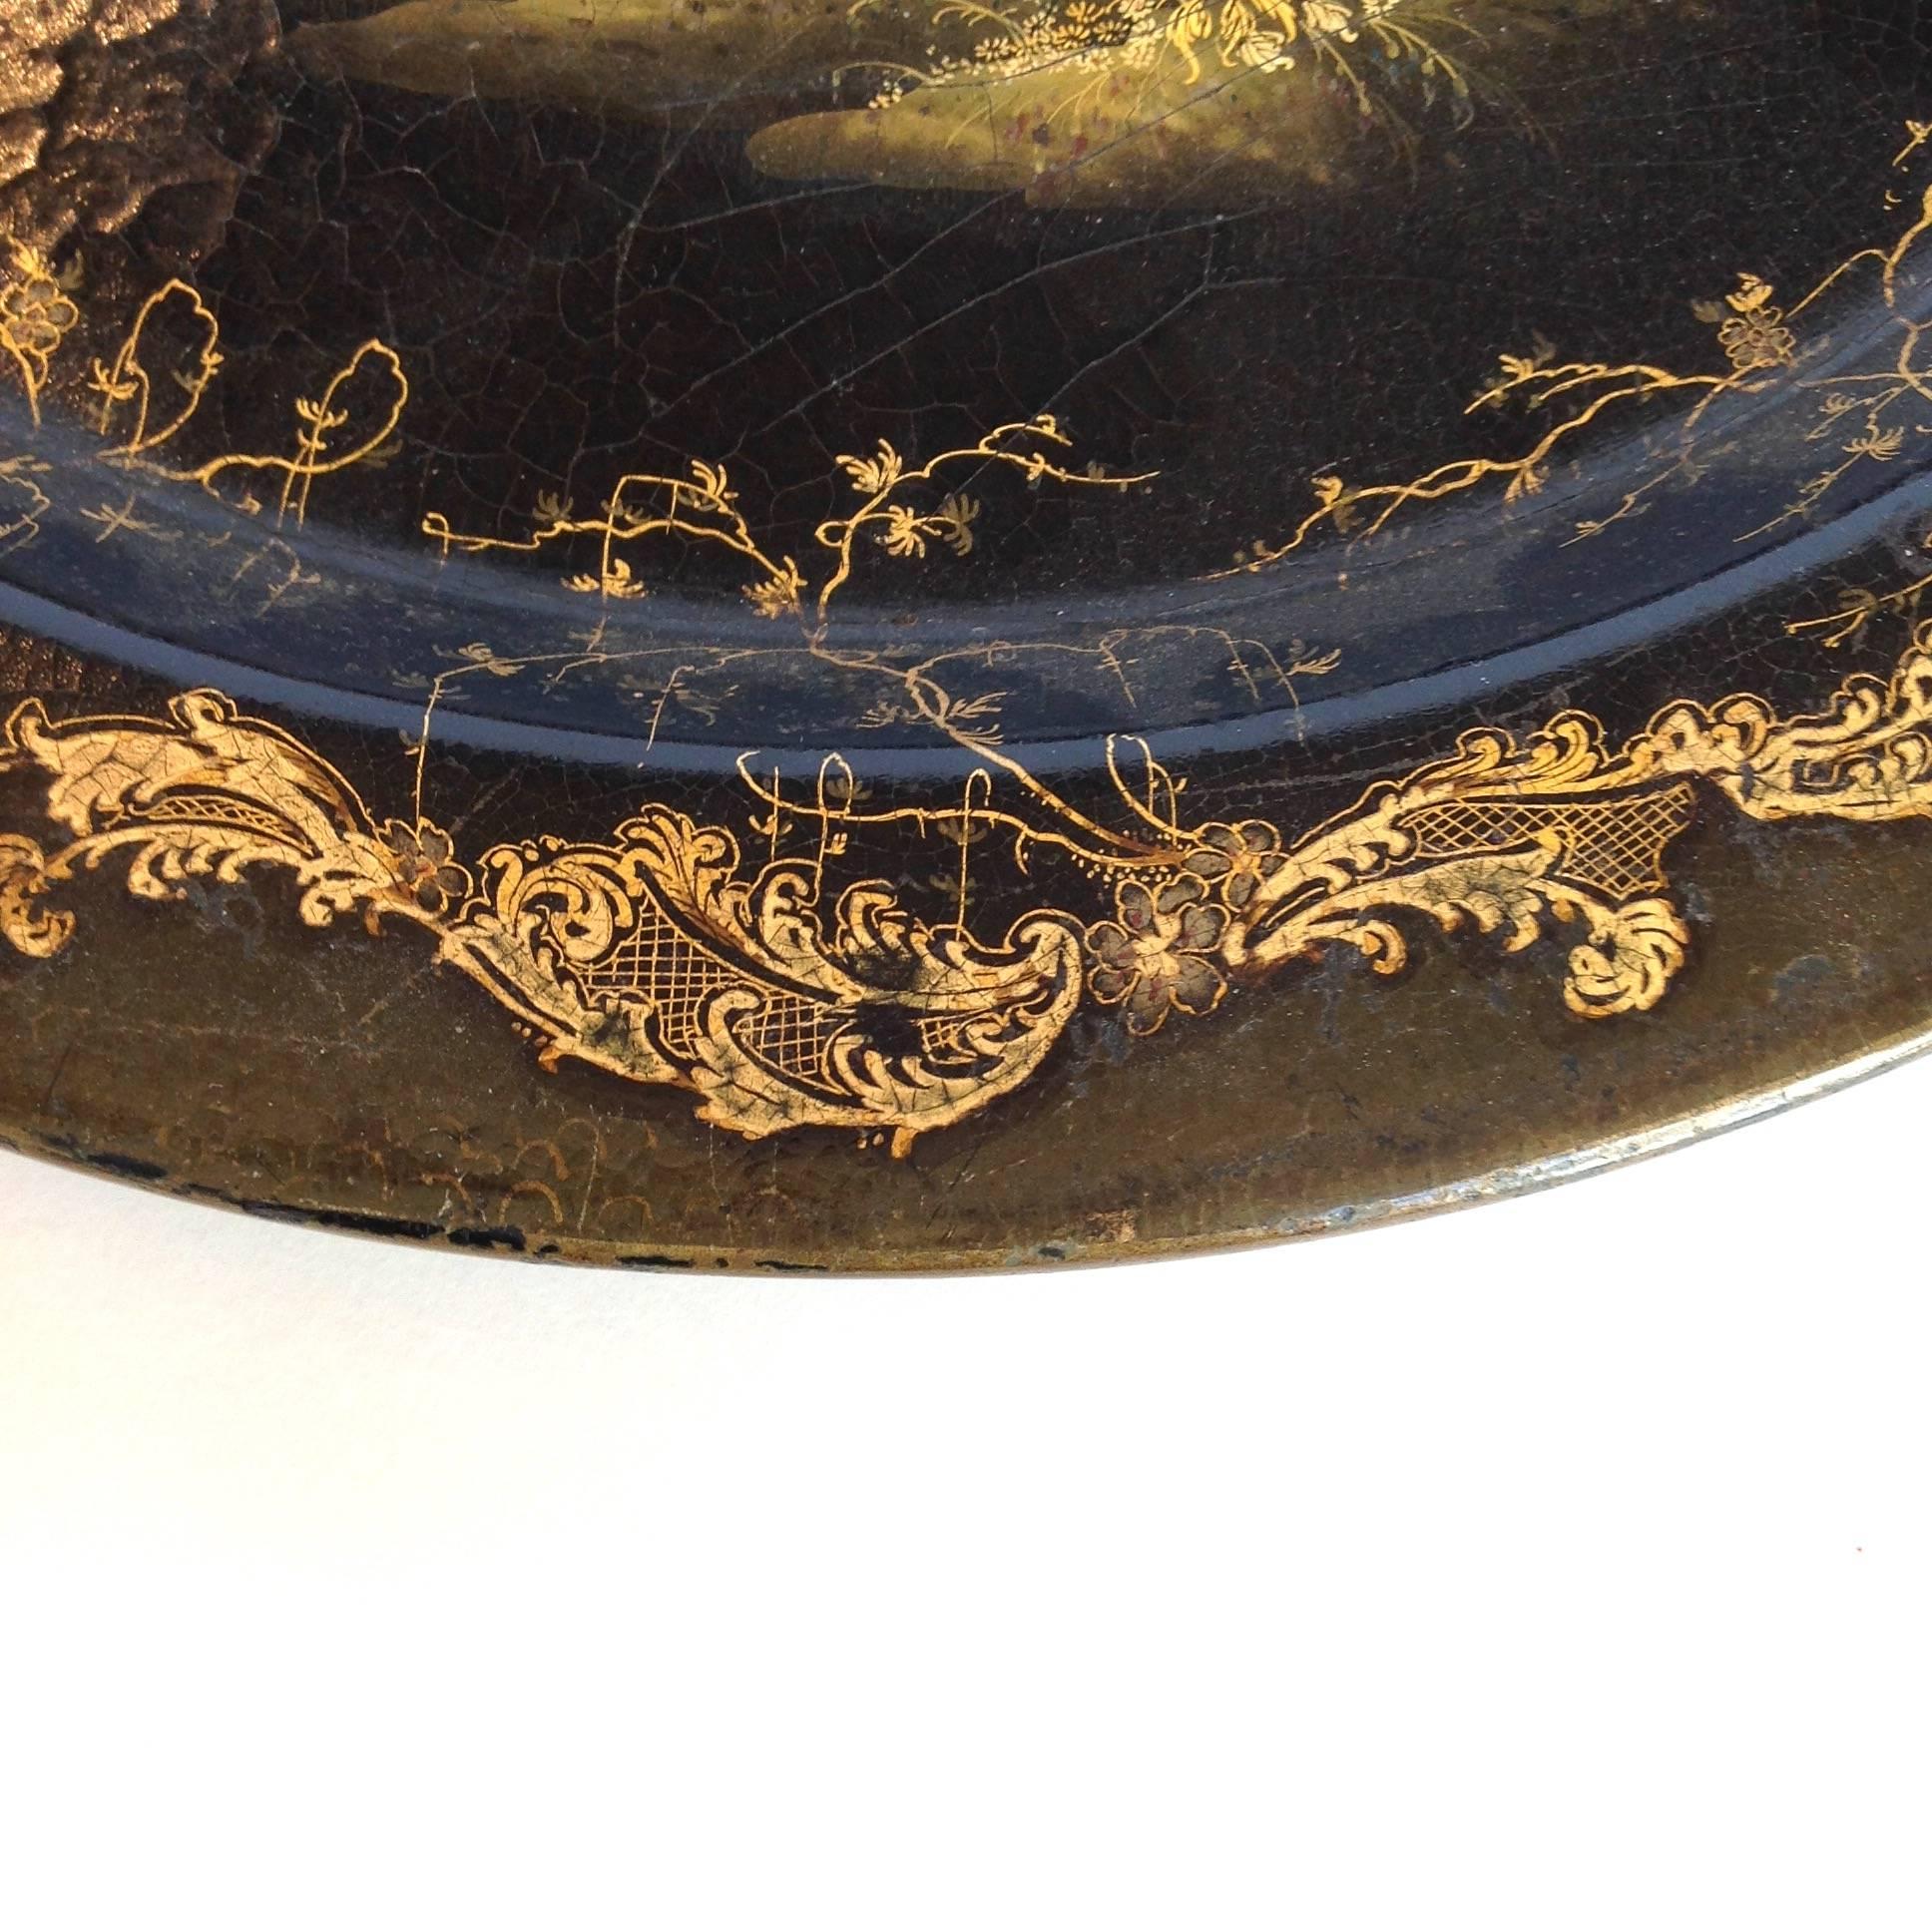 Chinoiserie Papier-mâché Tray by Henry Clay Metal Handle Early 19th Century For Sale 1